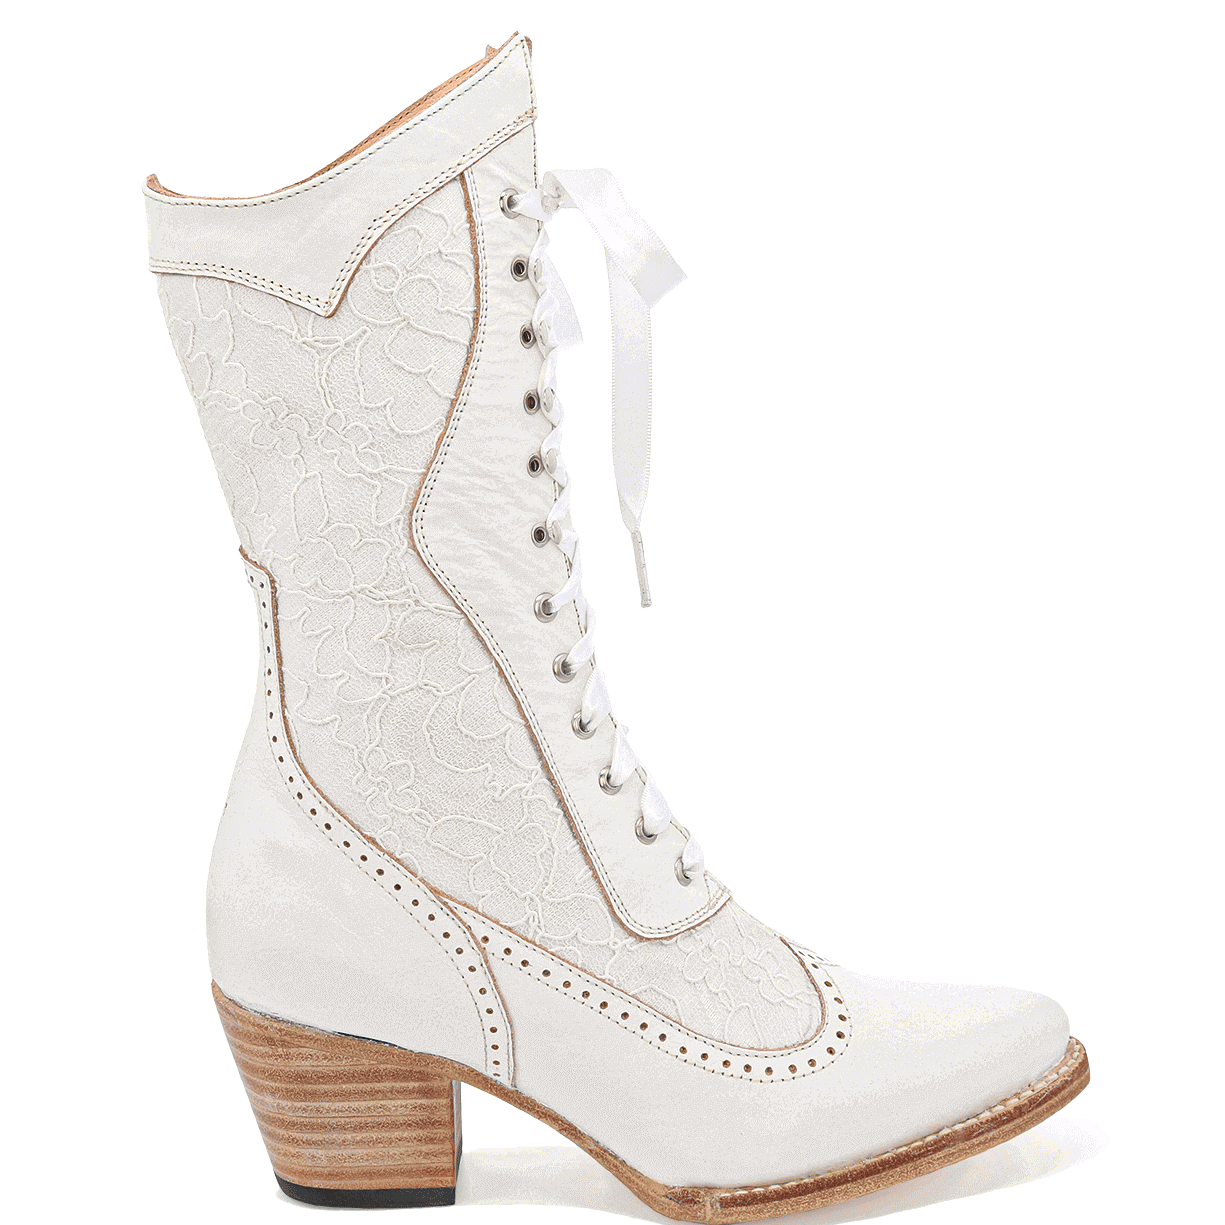 A seductive Oak Tree Farms Biddy lace-up boot with a wooden heel.